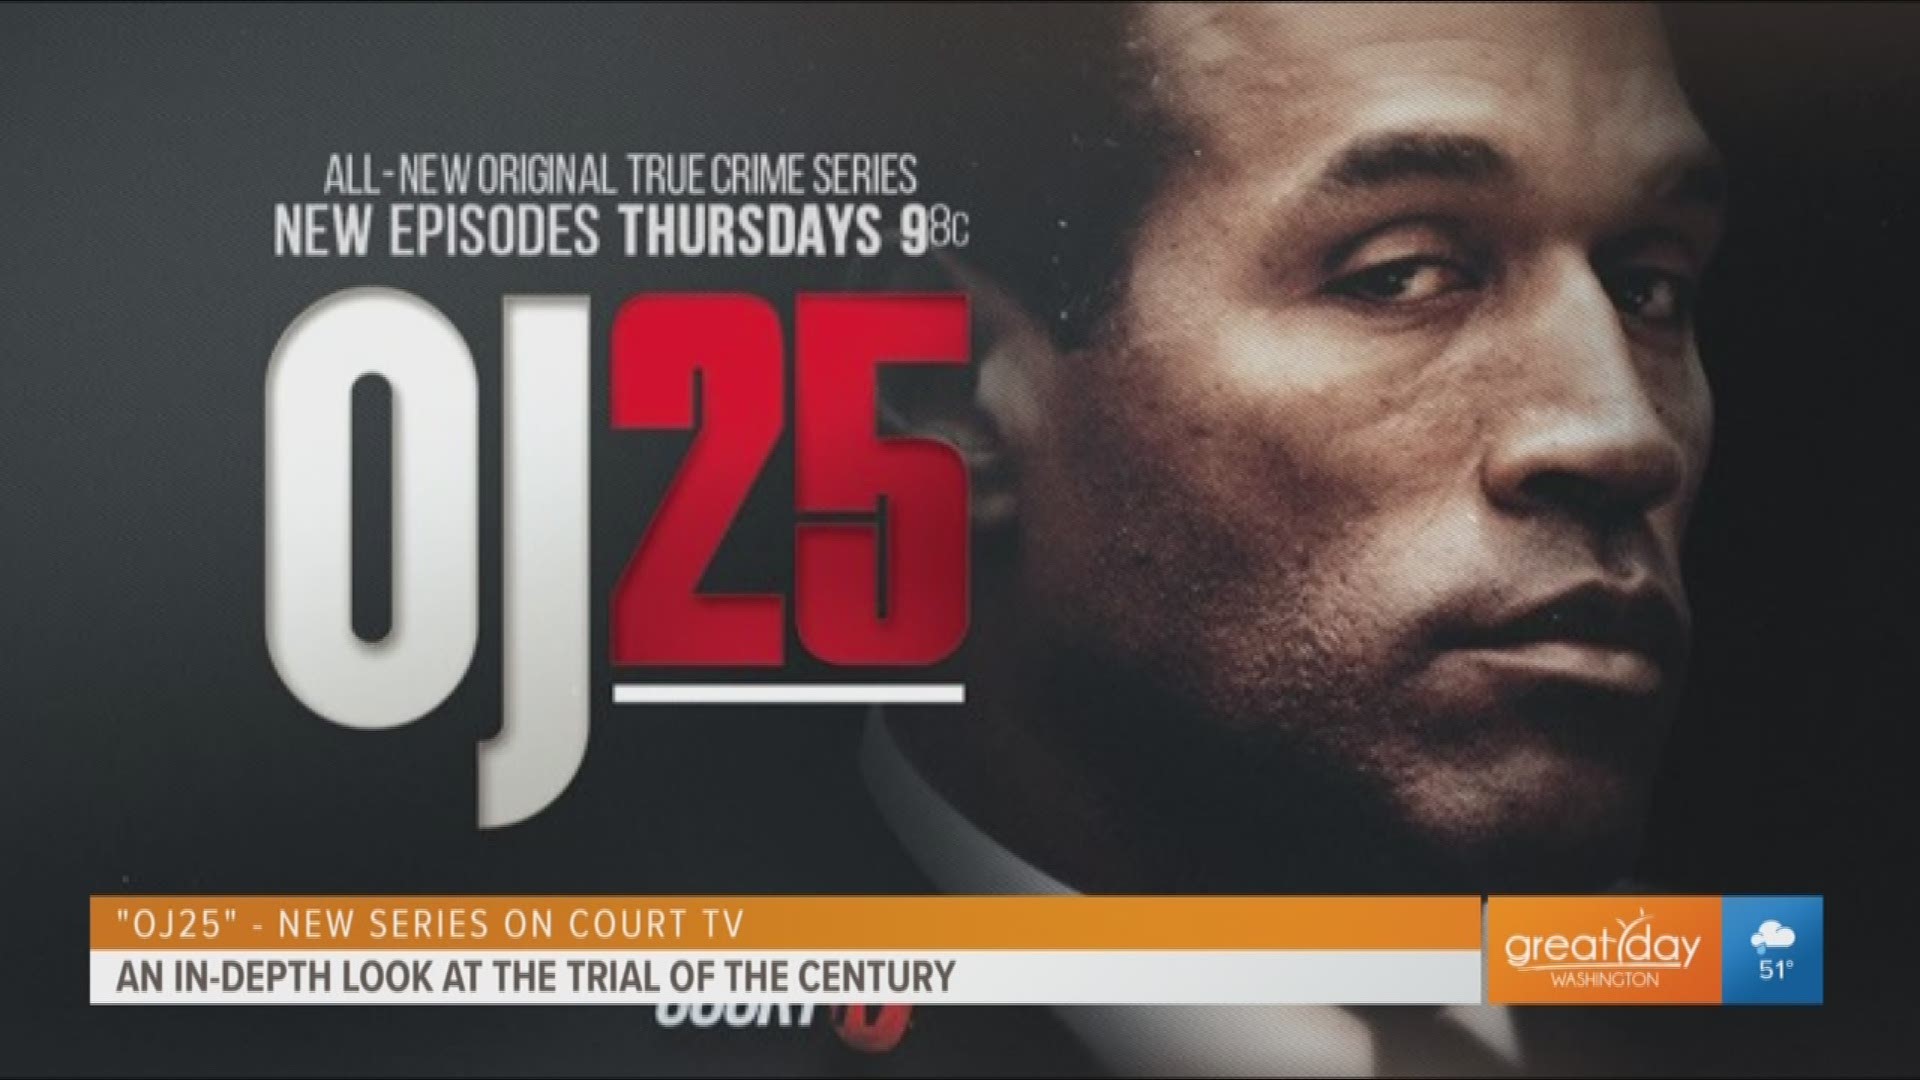 Roger Cossack, long time legal analyst and Washington resident, discusses the new show "OJ 25" on CourtTV. It will dive deep into the circus that was the OJ trial.